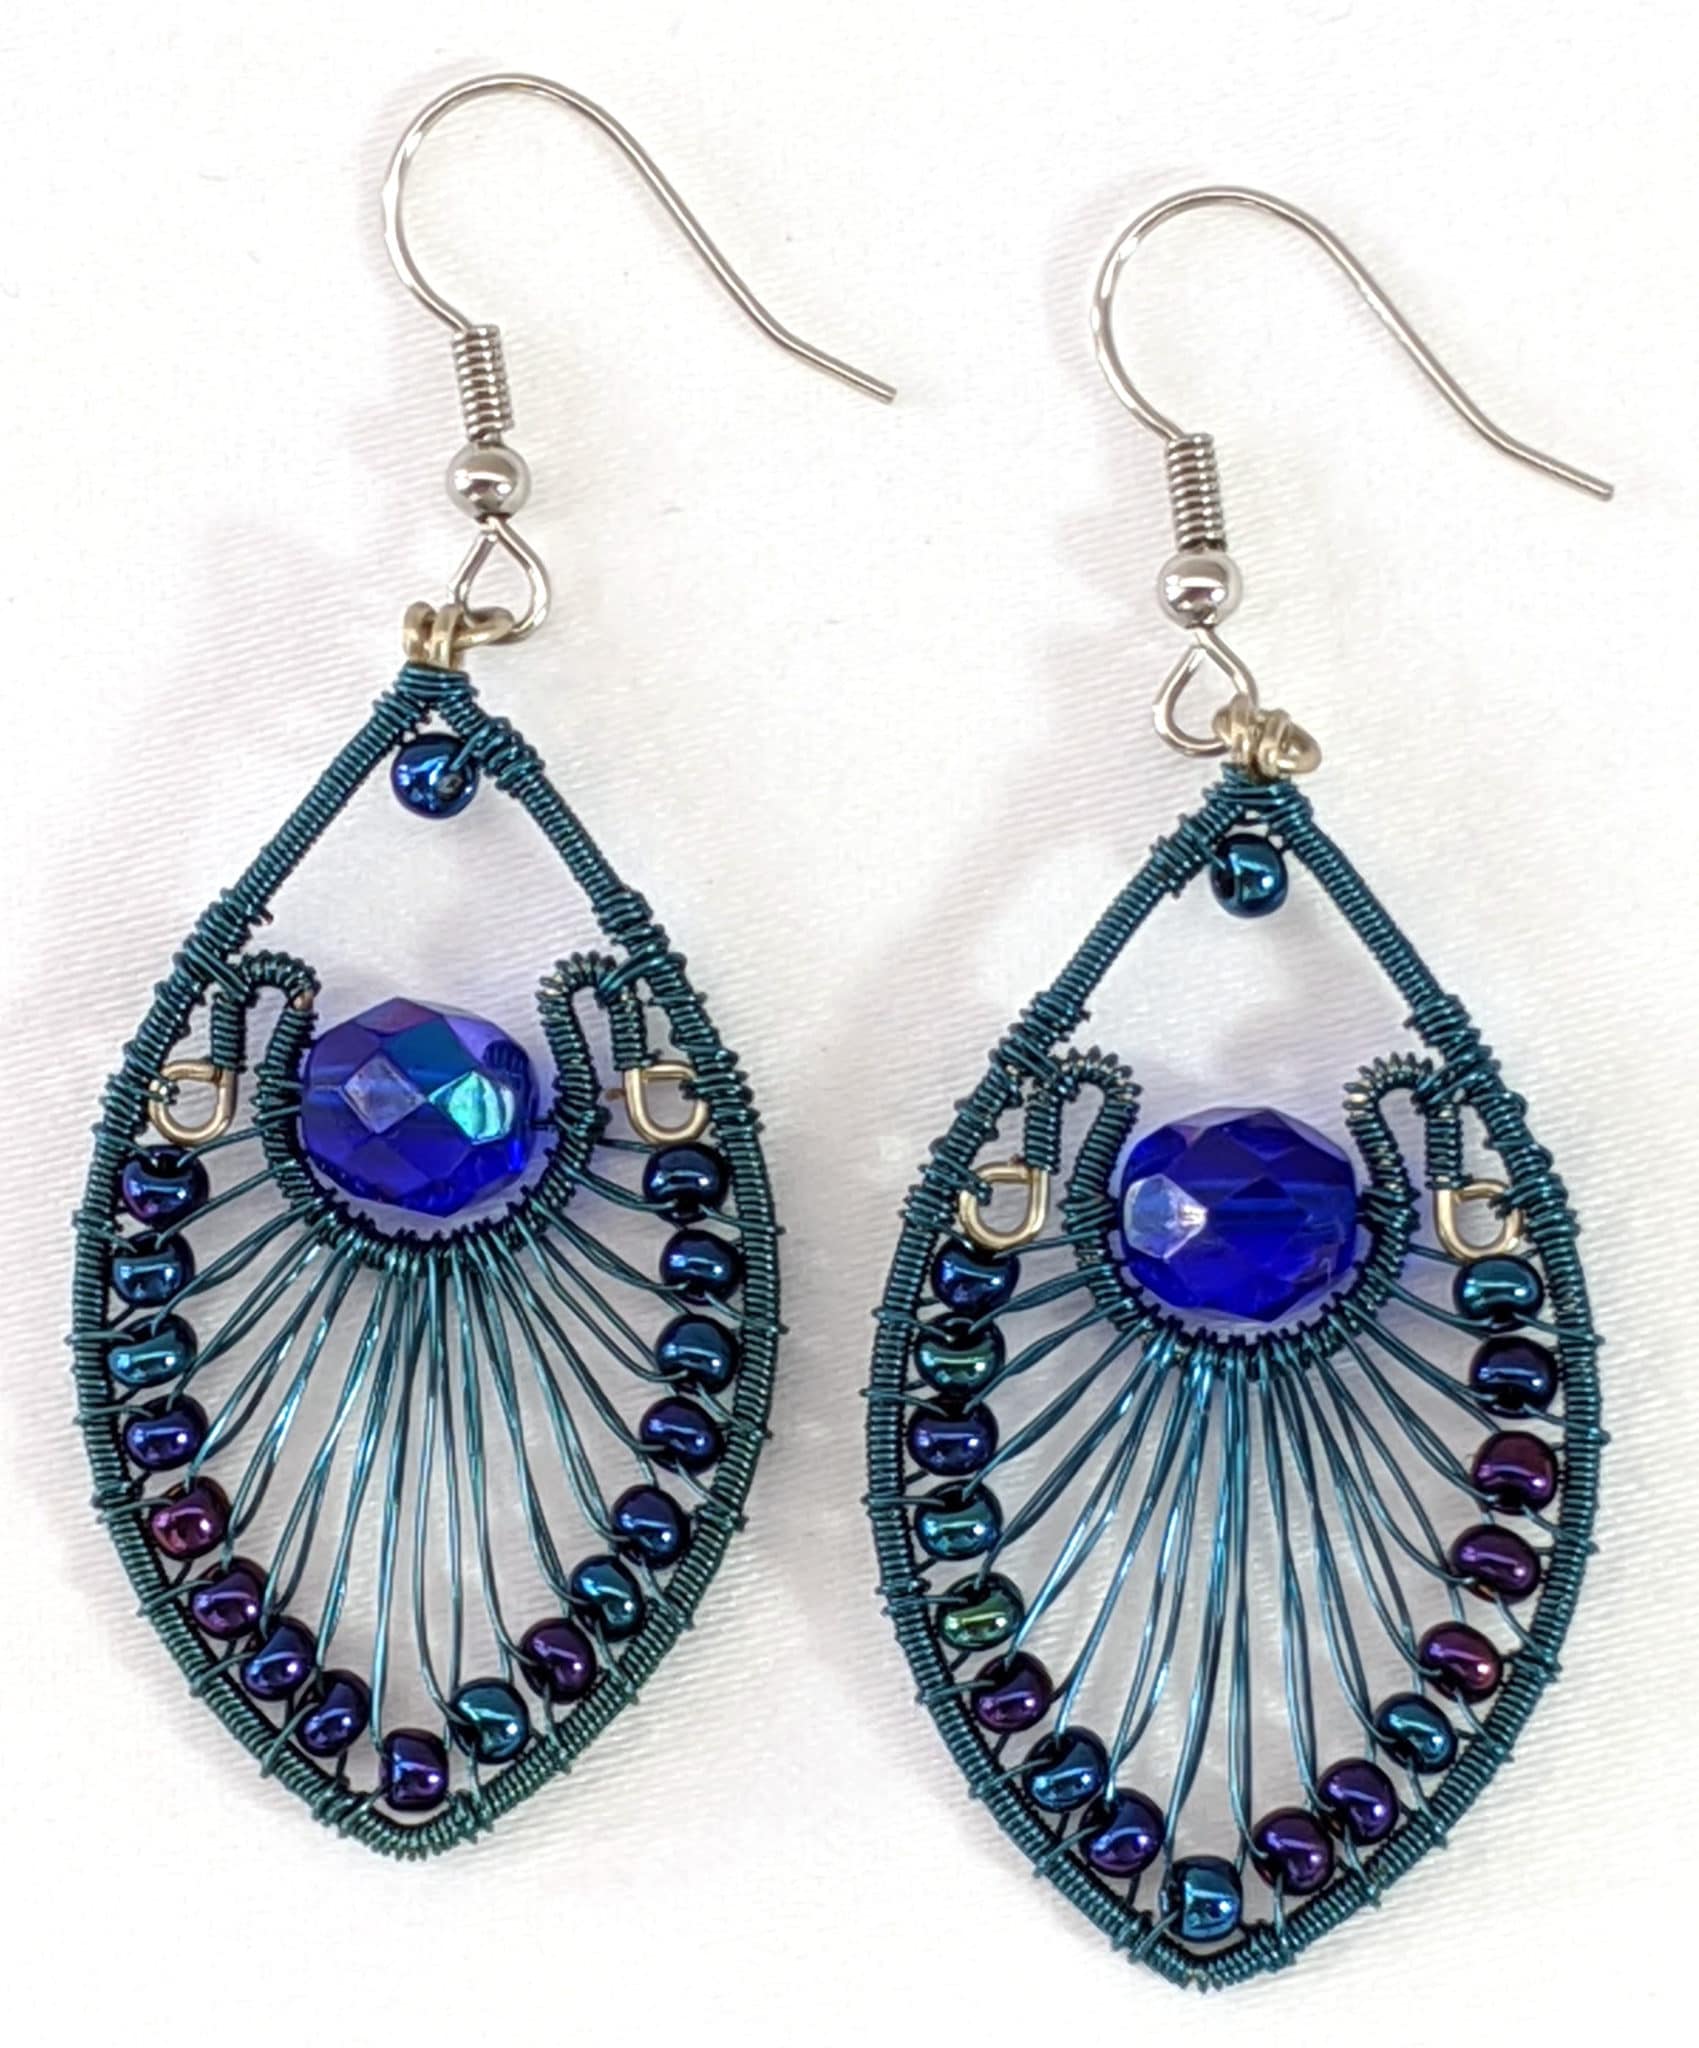 handcrafted tribal jewelry; blue earrings peacock blue medieval ethnic earrings set with medieval oxidized copper